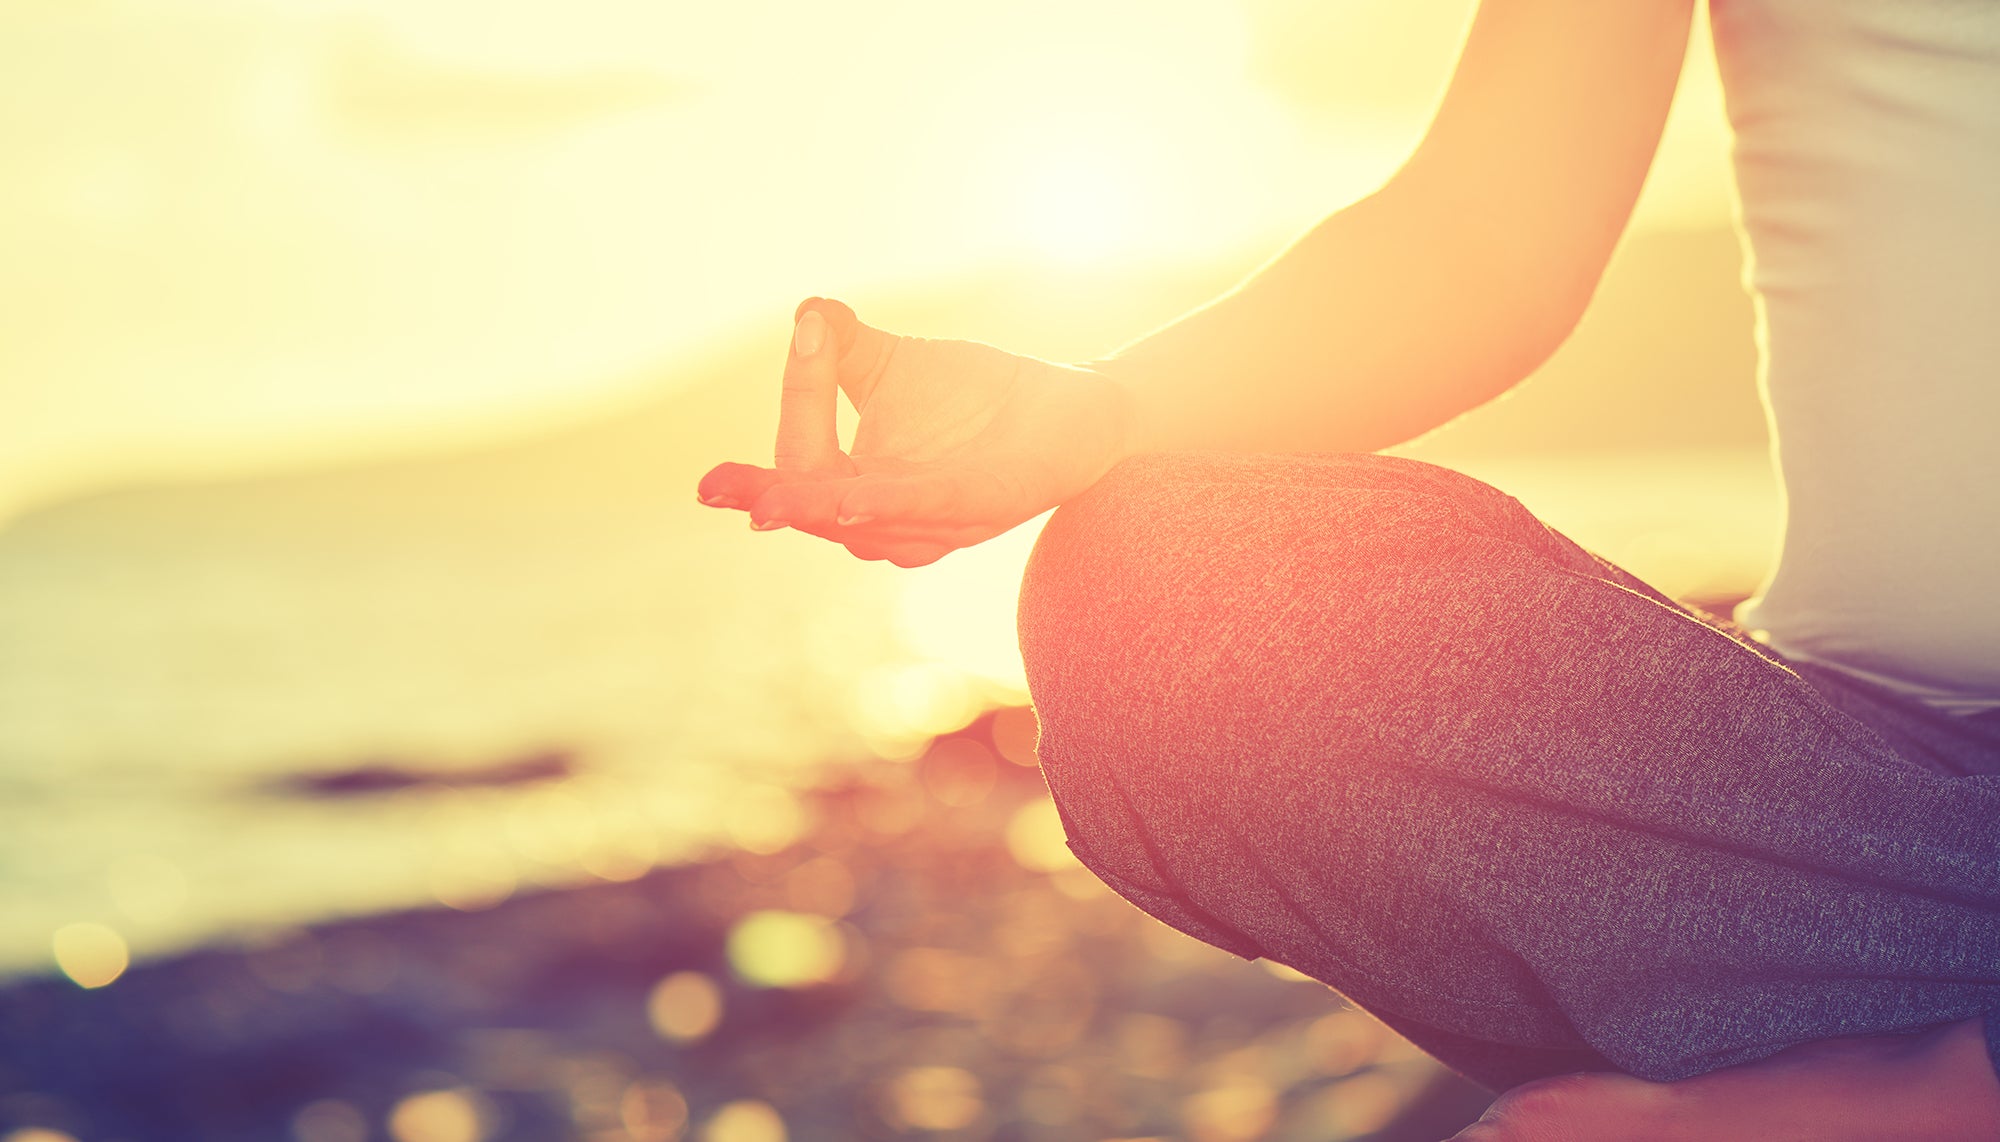 Practice Mindfulness Meditation with Aromatherapy: 5 Exercises to Keep you Grounded